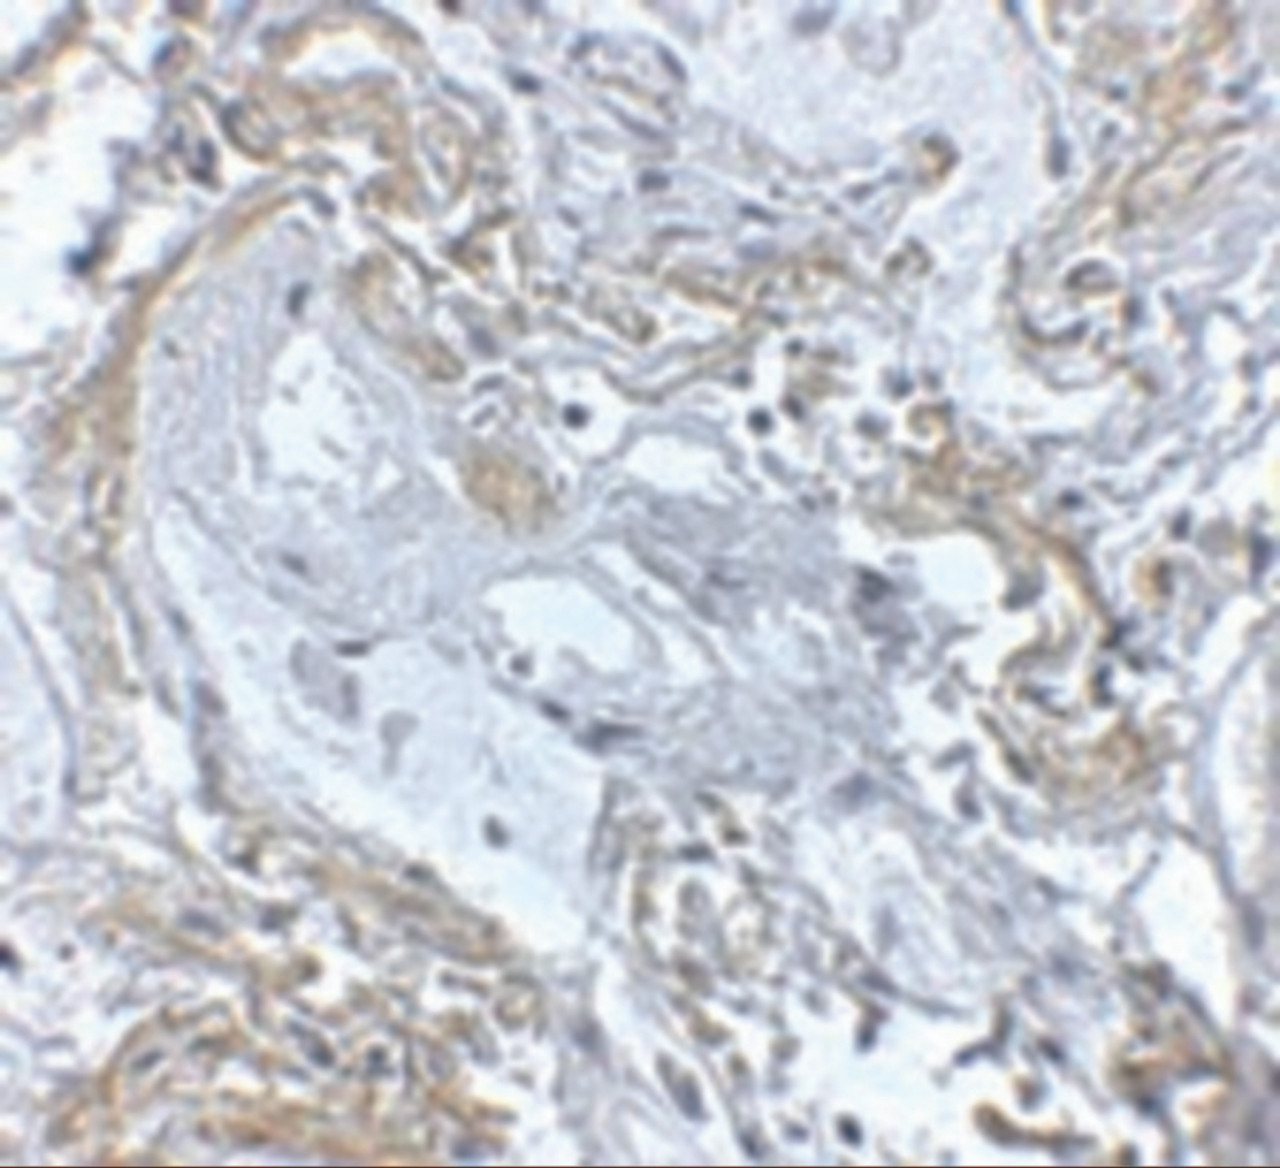 Immunohistochemistry of TNFAIP3 in human lung tissue with TNFAIP3 antibody at 5 ug/mL.